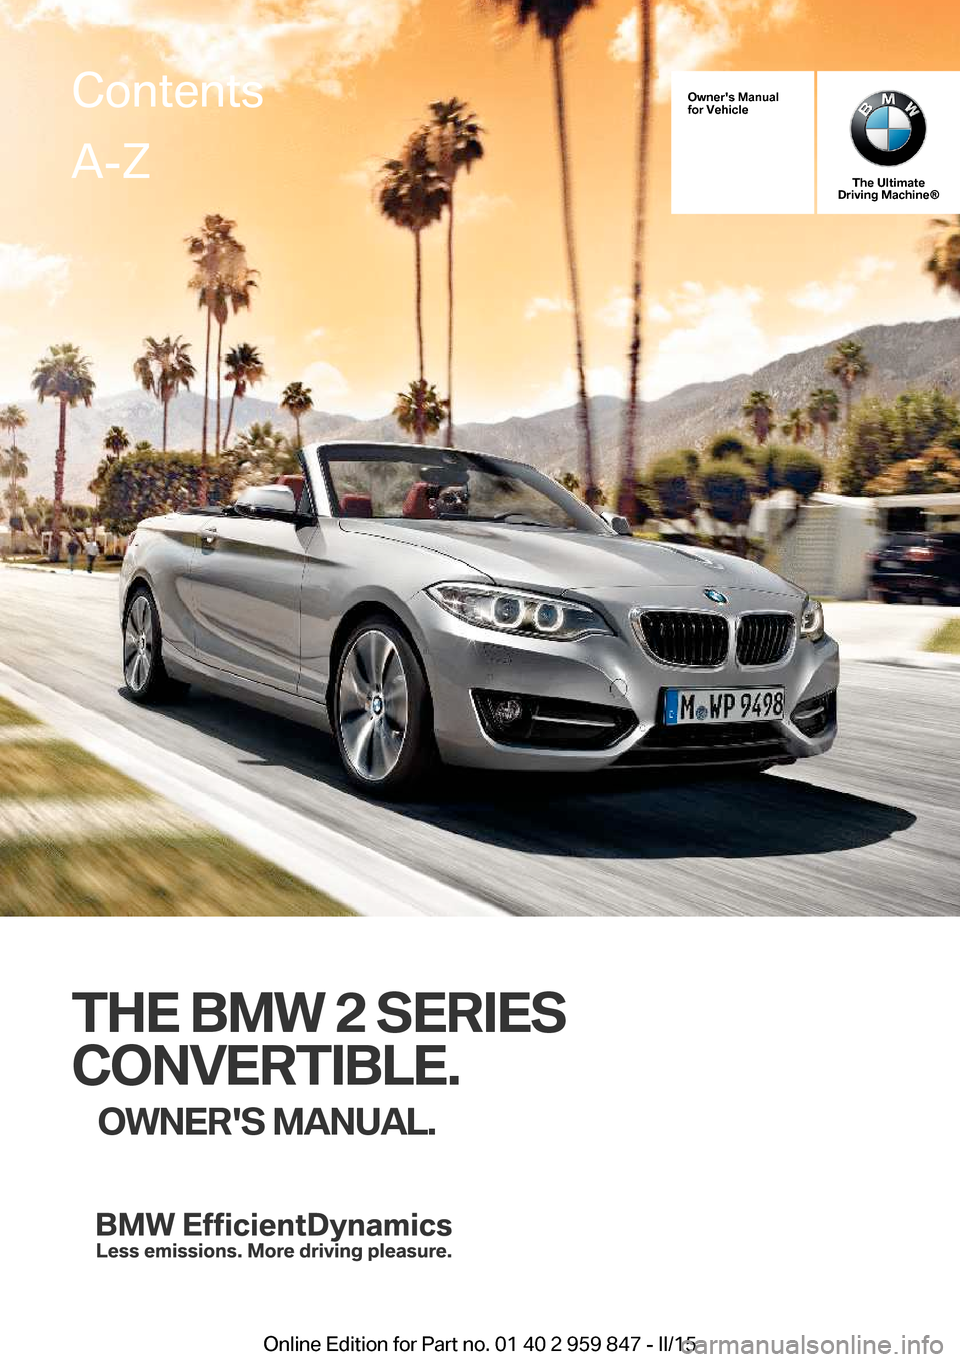 BMW 2 SERIES CONVERTIBLE 2015 F23 Owners Manual Owners Manual
for Vehicle
The Ultimate
Driving Machine®
THE BMW 2 SERIES
CONVERTIBLE. OWNERS MANUAL.
ContentsA-Z
Online Edition for Part no. 01 40 2 959 847 - II/15   